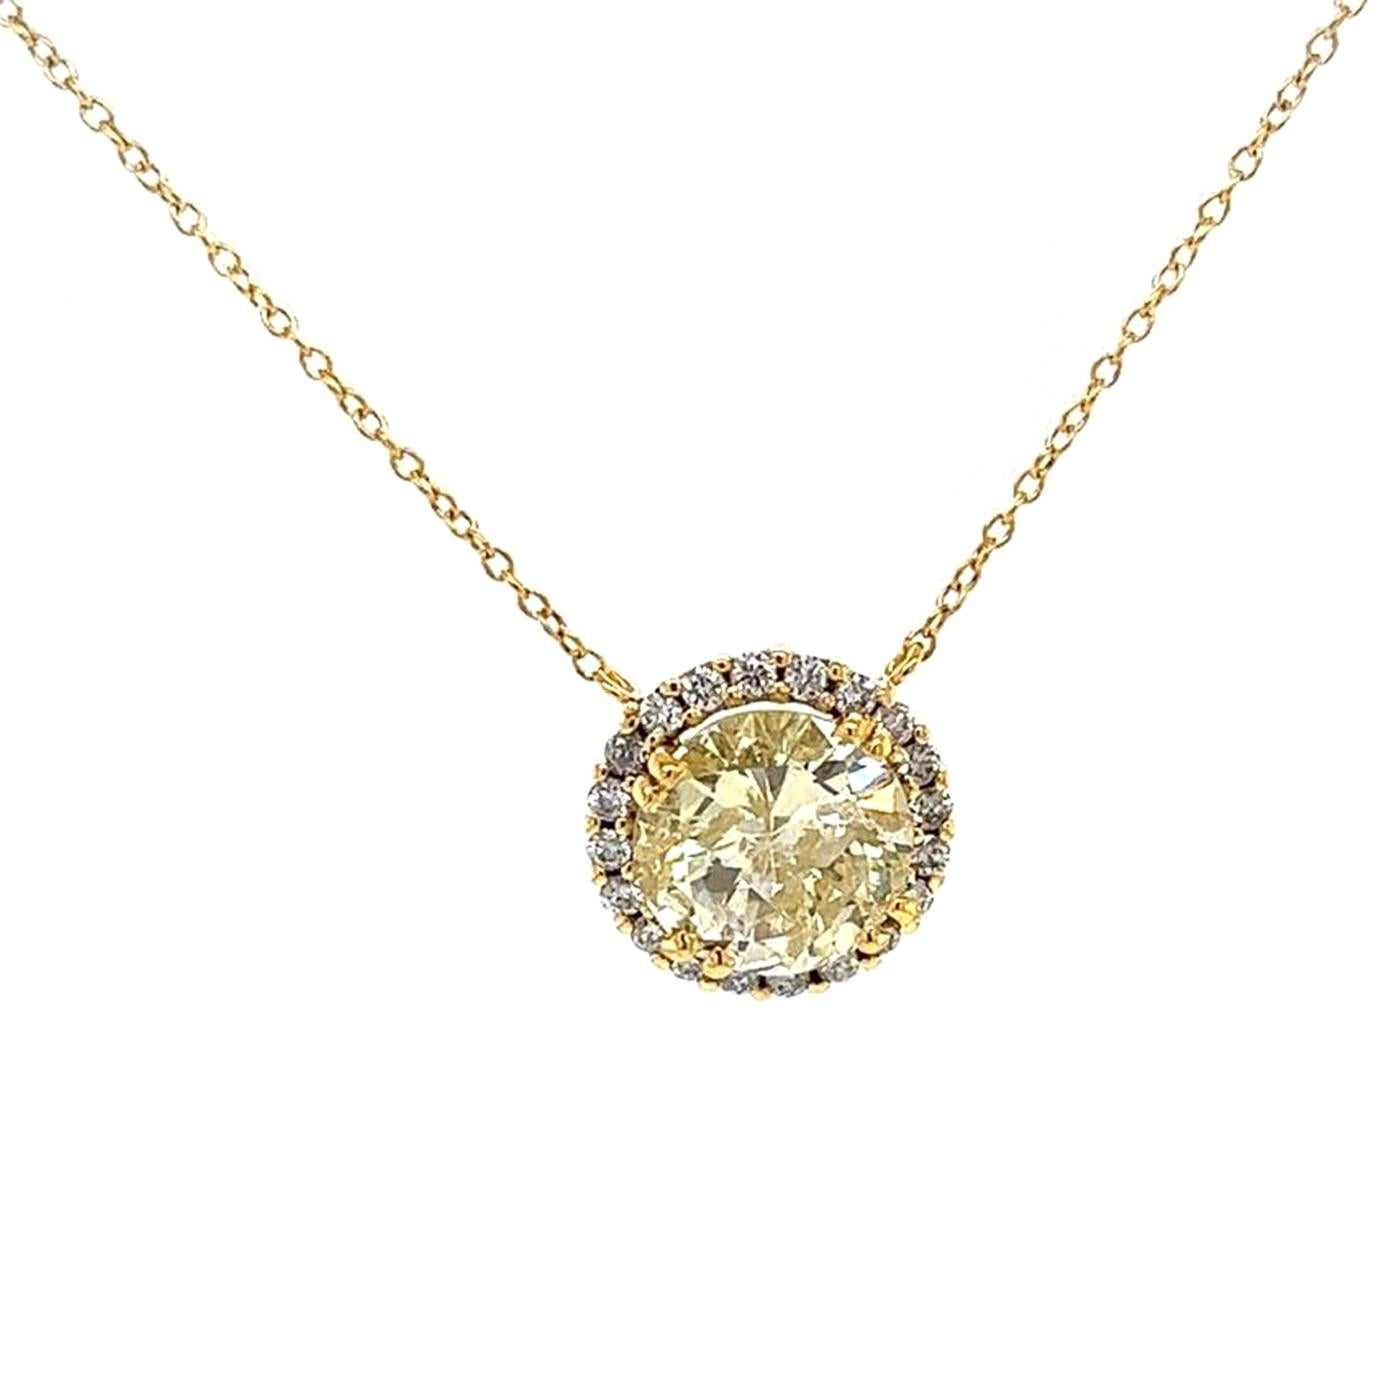 3.15 Carat Natural Fancy Yellow Round Diamond 18K Gold Pendant Halo Necklace For Sale 1